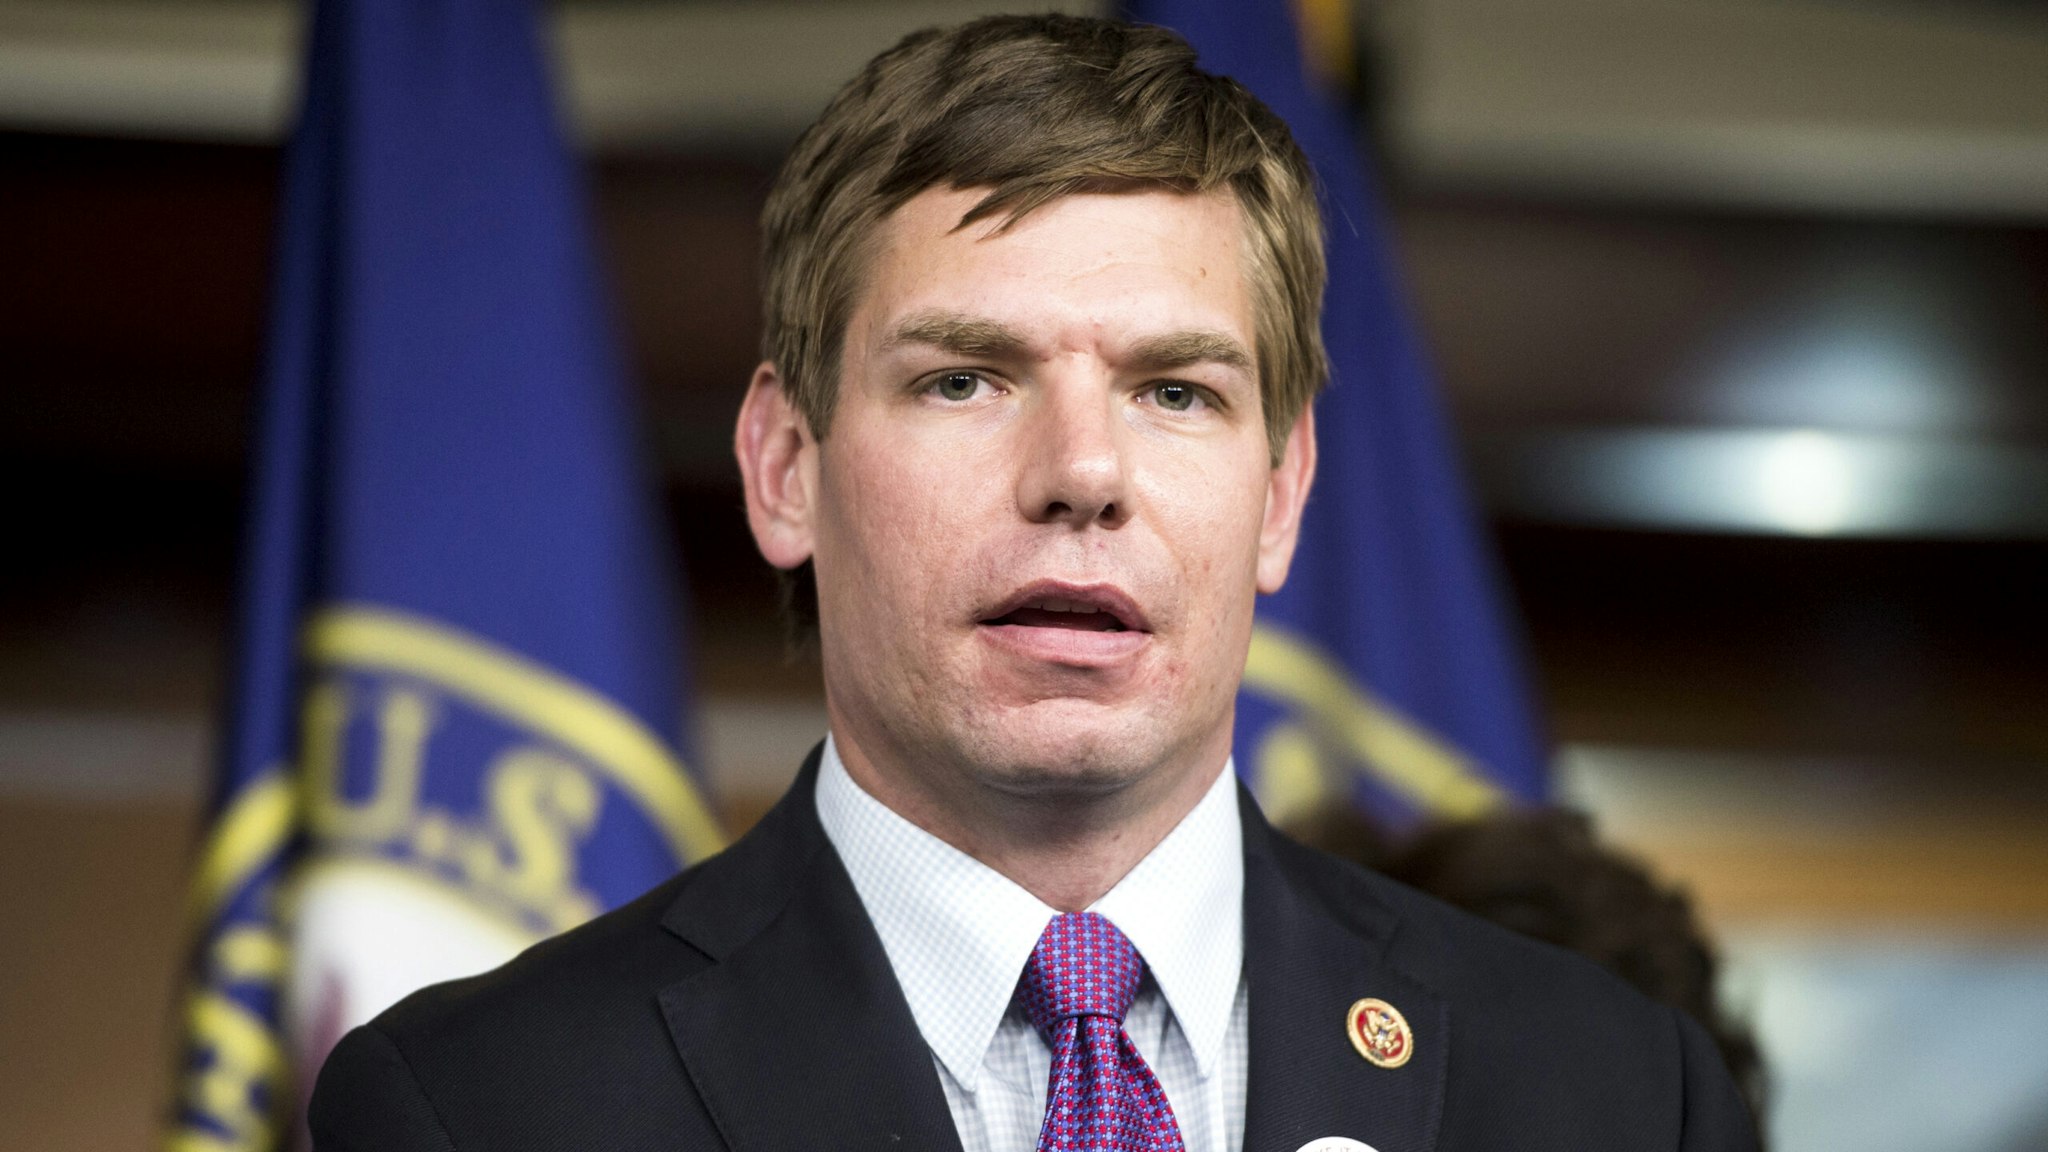 UNITED STATES - JULY 30: Rep. Eric Swalwell, D-Calif., speaks during the House Democrats' news conference to discuss Republican lawsuit against President Obama and the House Democrats' focus on the economy on Wednesday, July 30, 2014.